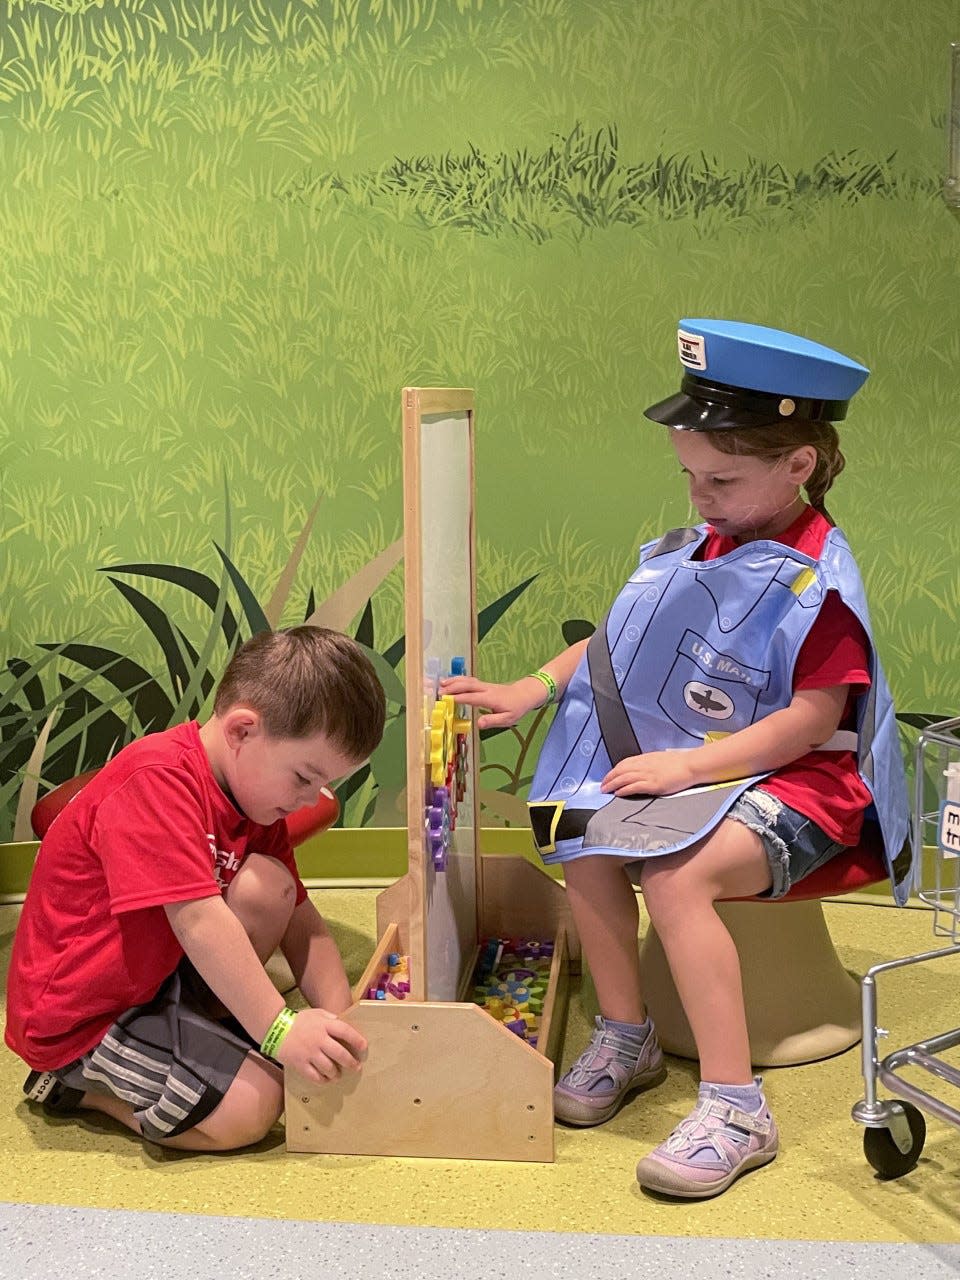 Imaginative play is encouraged in the Play & Learn Place, which opened about a year ago.